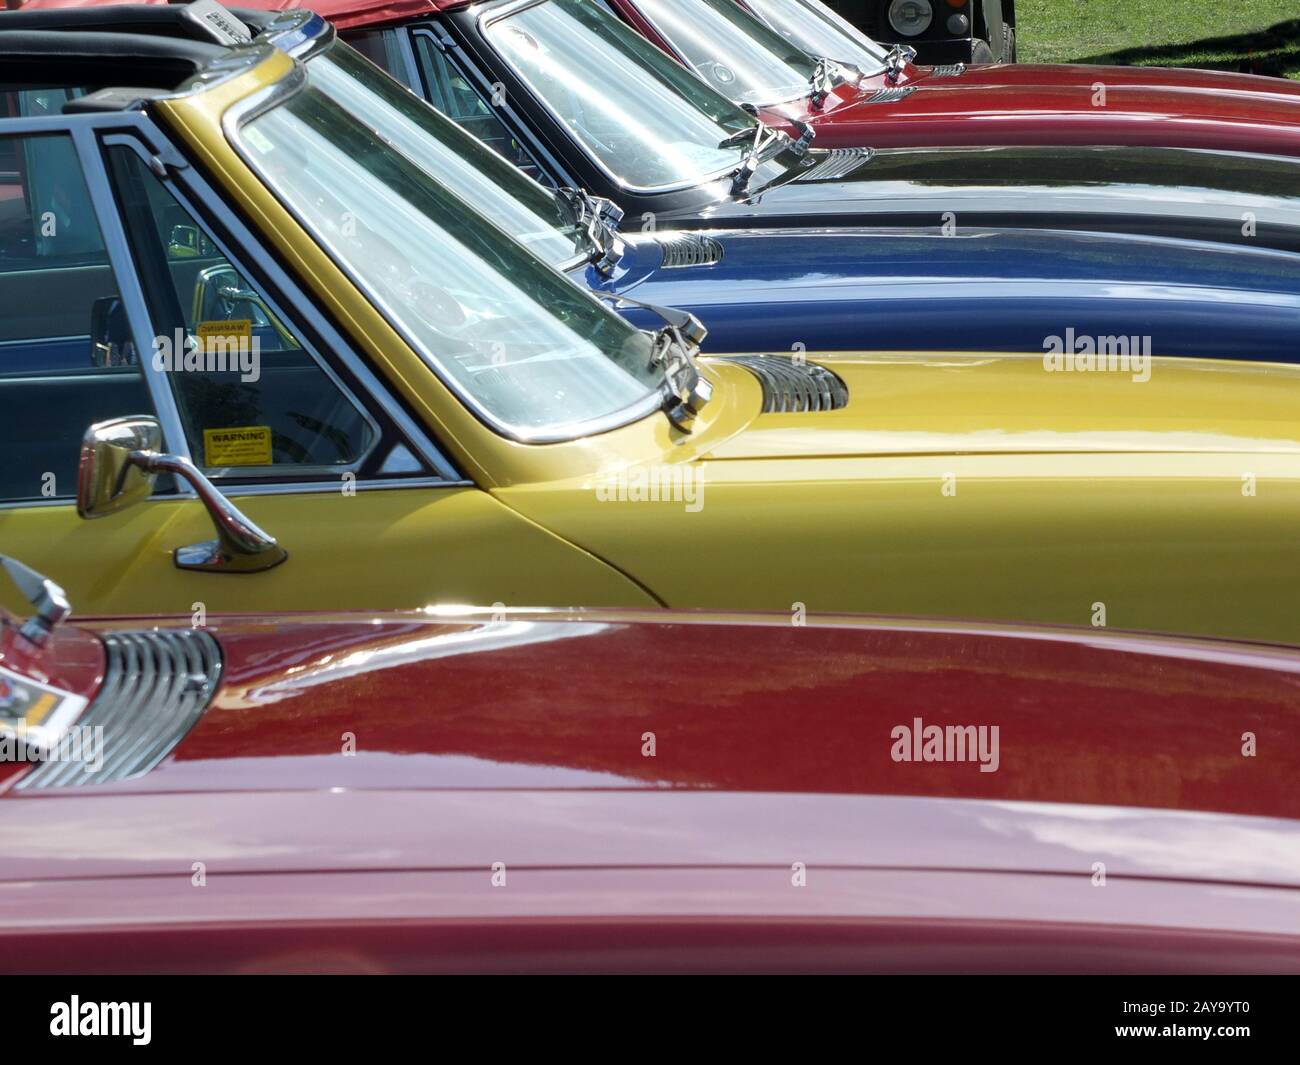 Close up of the bonnets and windscreens of a row of vintage triumph stag sports cars Stock Photo